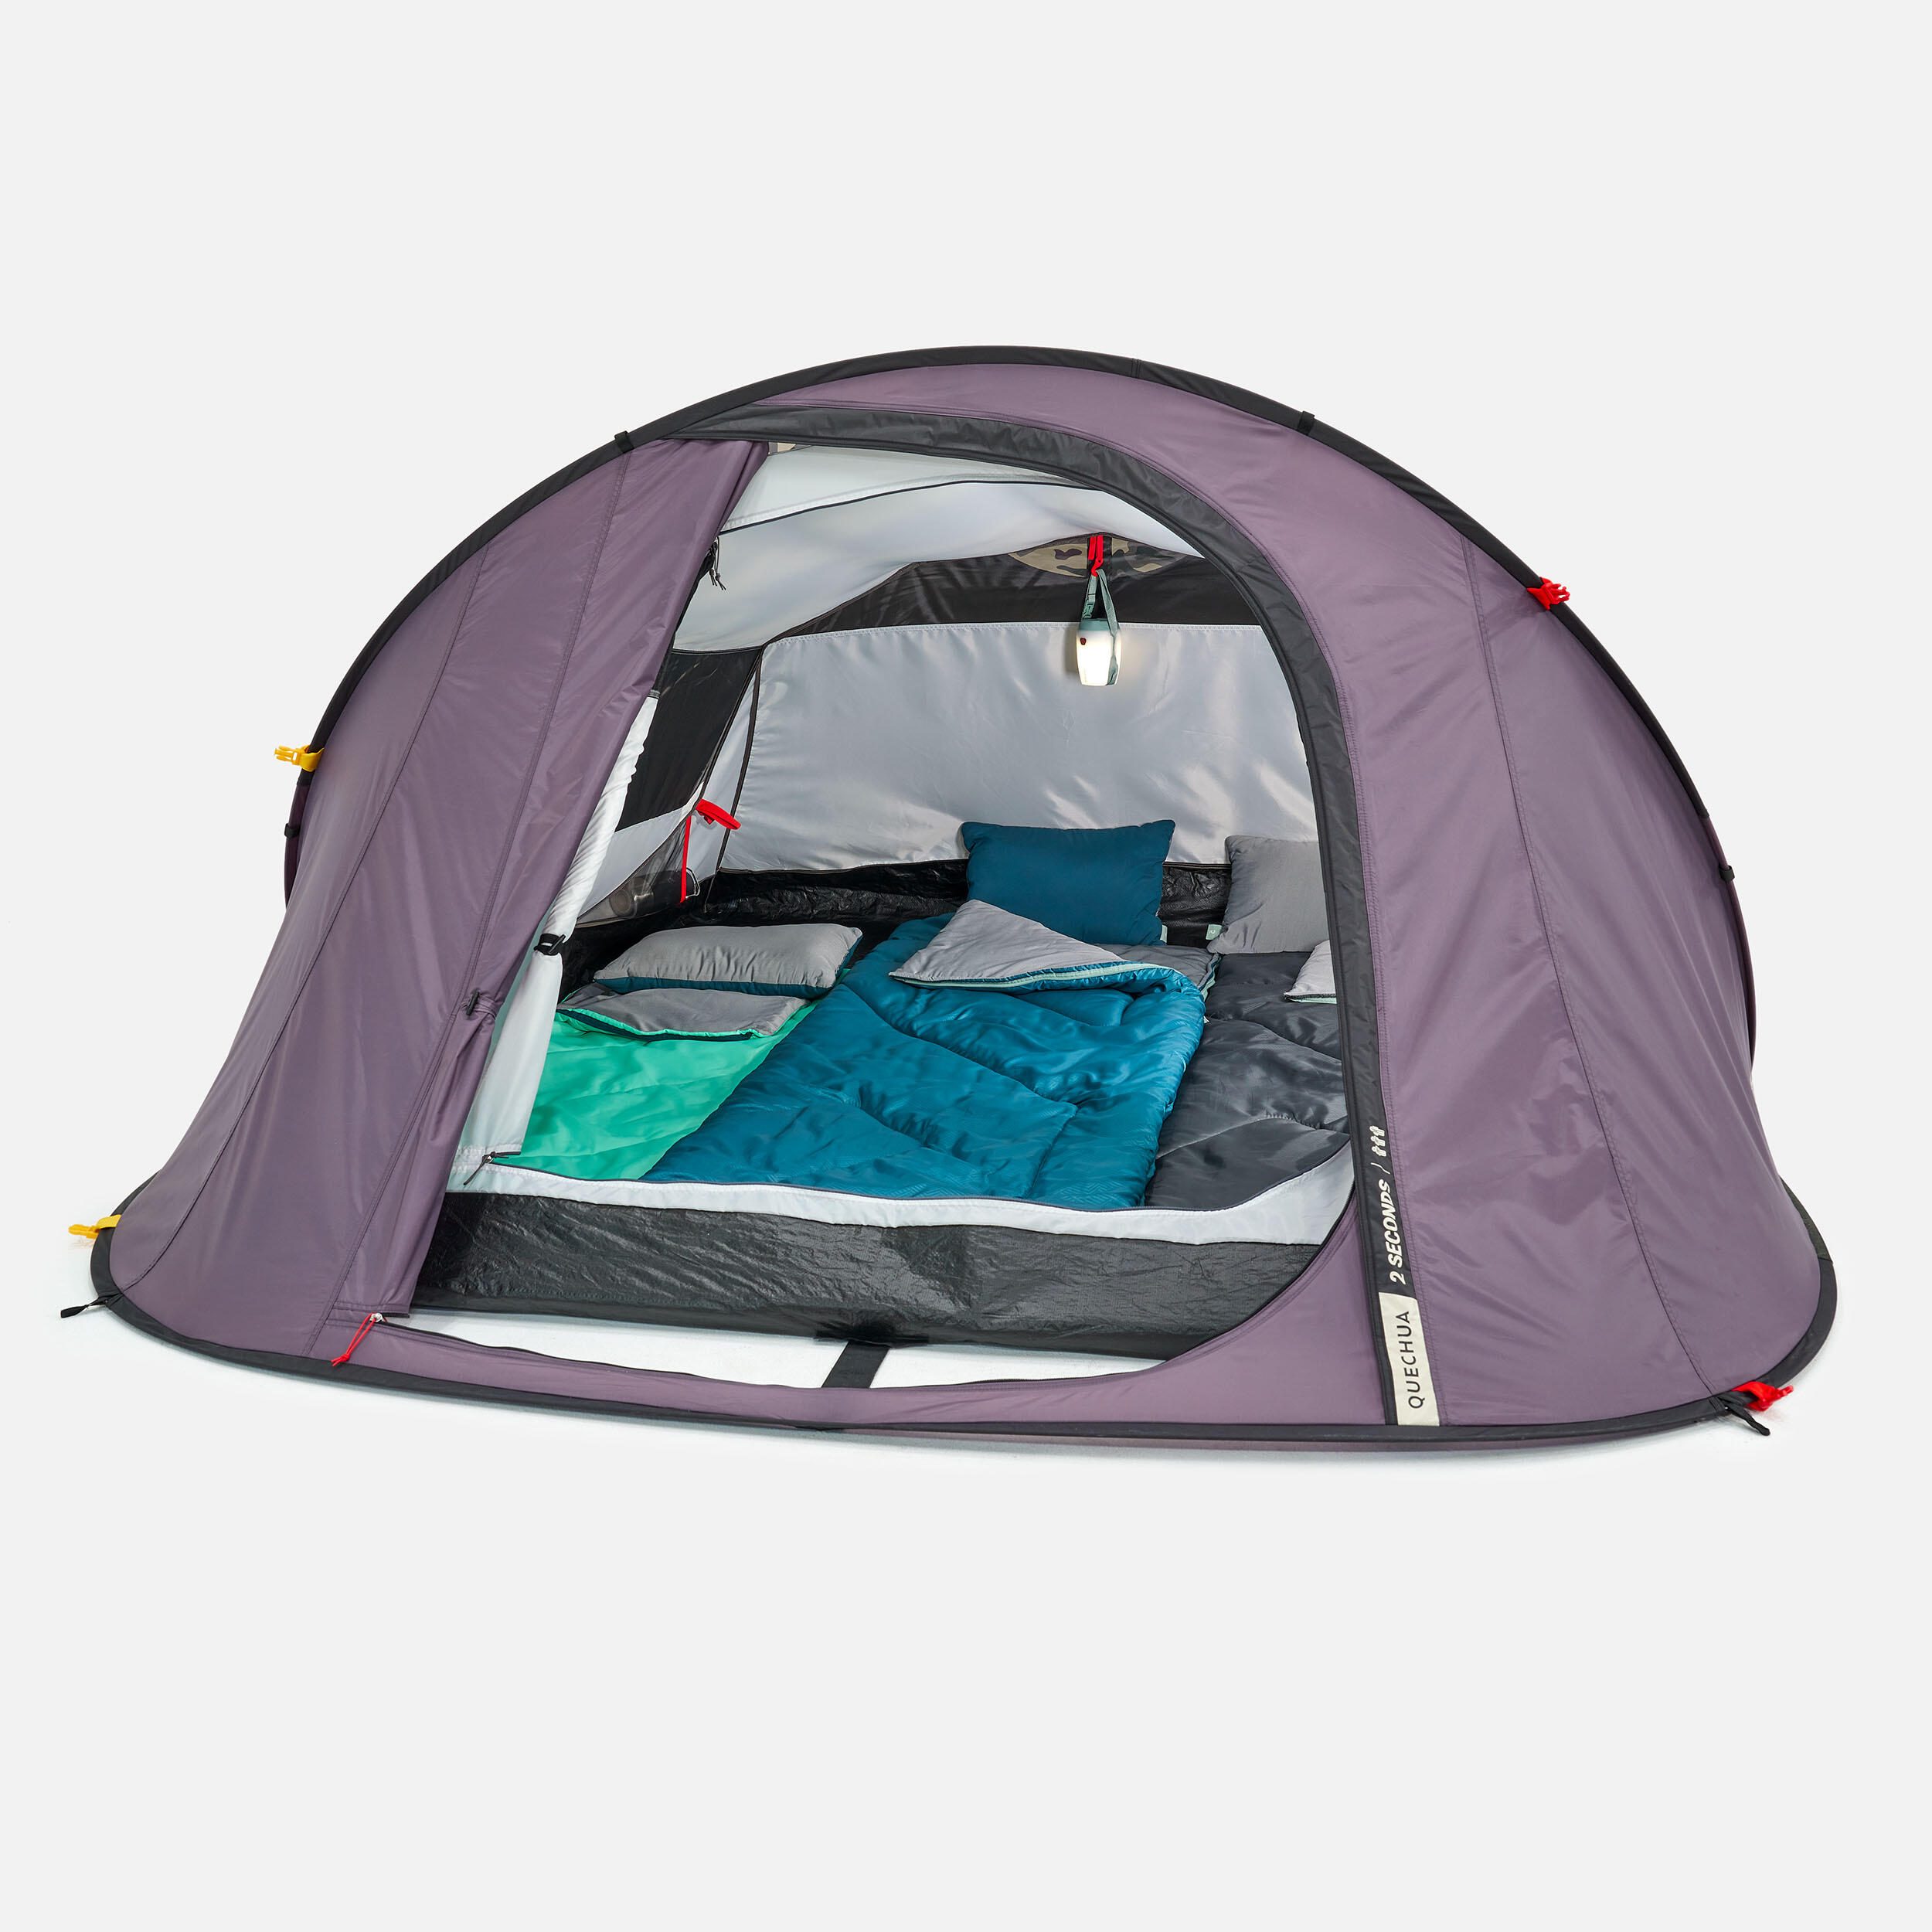 Camping tent - 2 SECONDS - 3-person 4/10